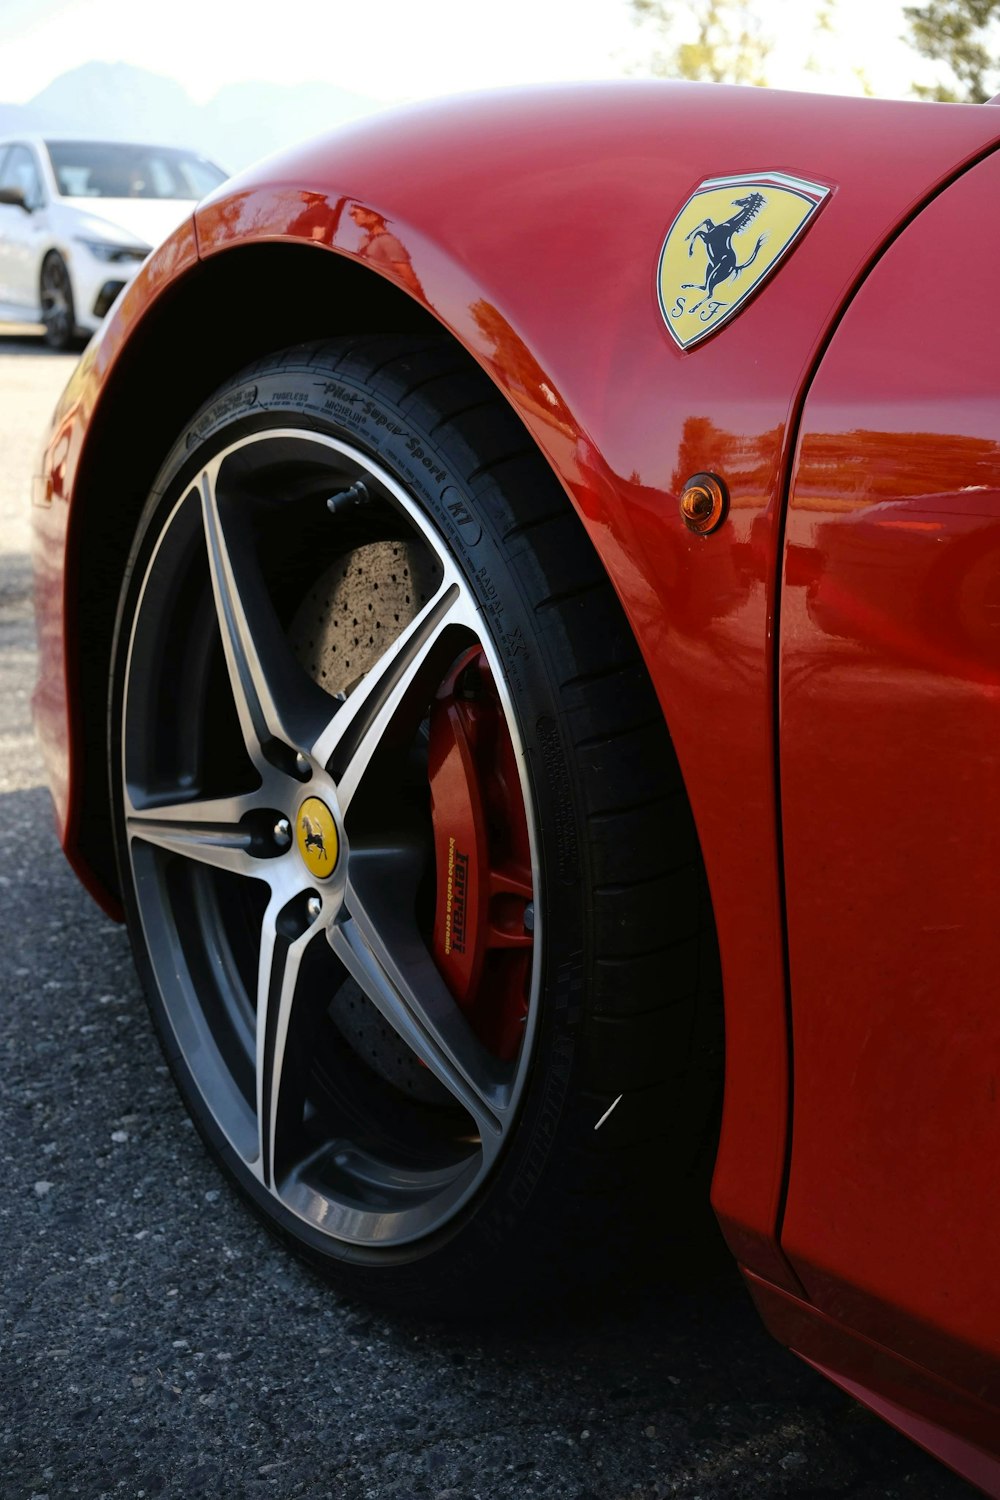 a close up of a red sports car tire